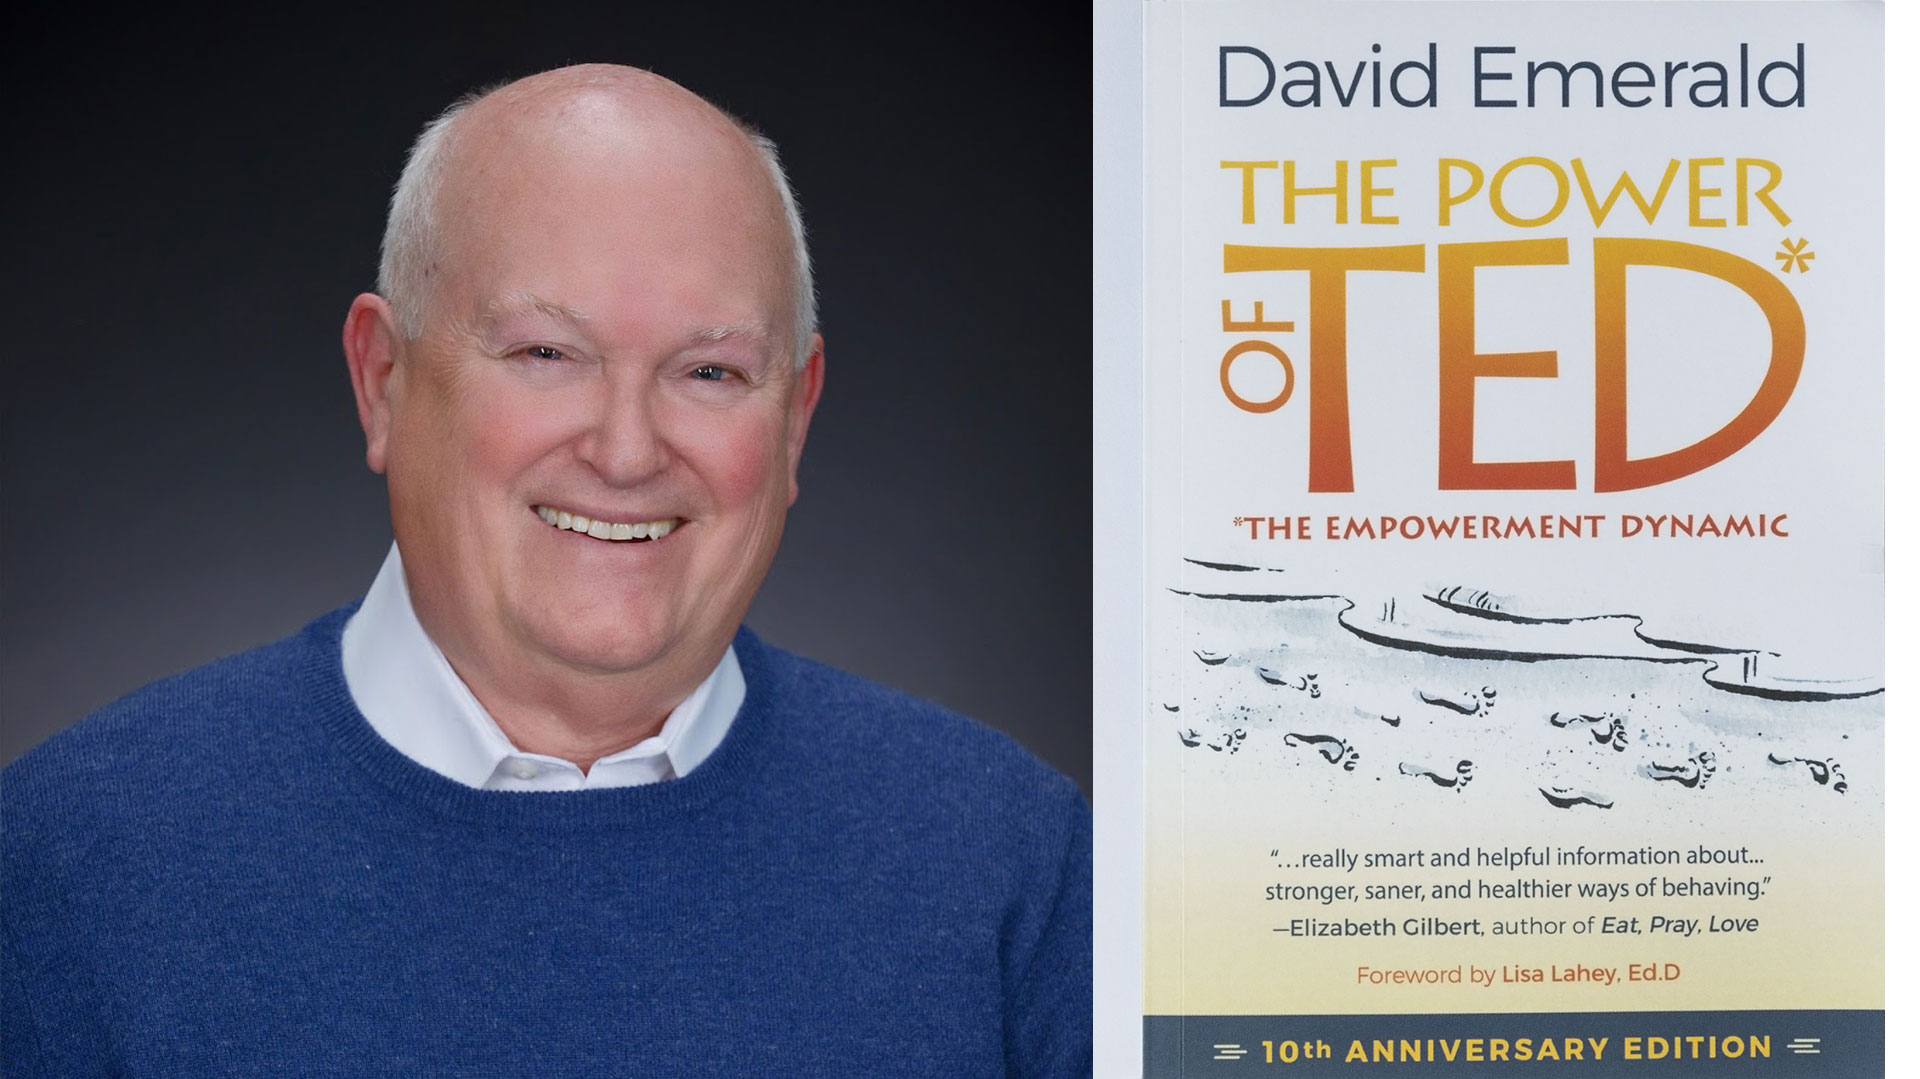 The Power of TED* – Interview with David Emerald